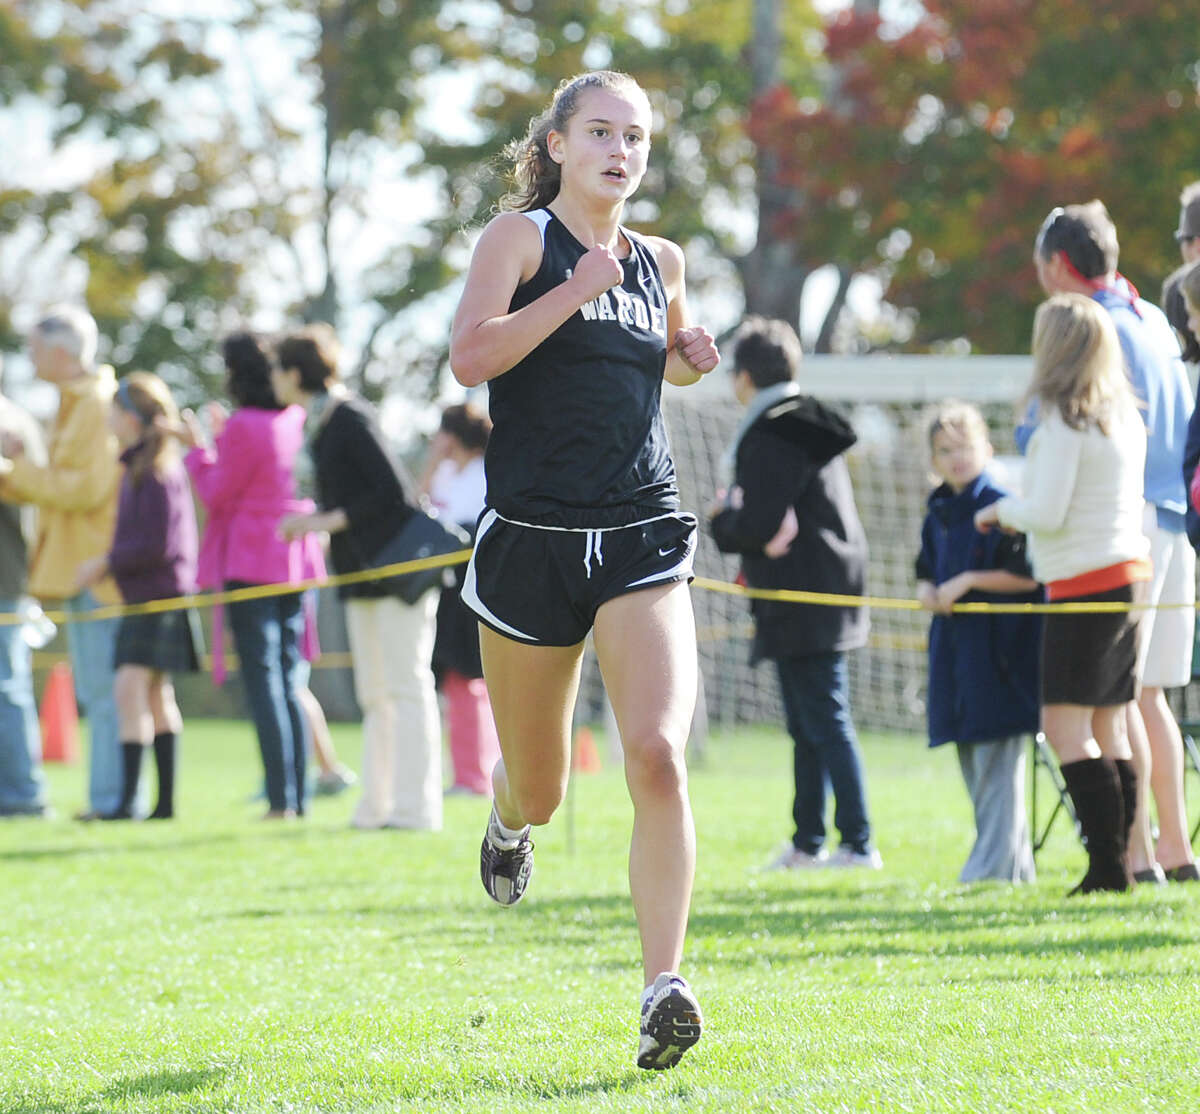 Fairfield-Warde High School runner Cate Allen finishes first during the FCIAC girls high school cross country championship at Waveny Park in New Canaan, Thursday afternoon, Oct. 18, 2012.